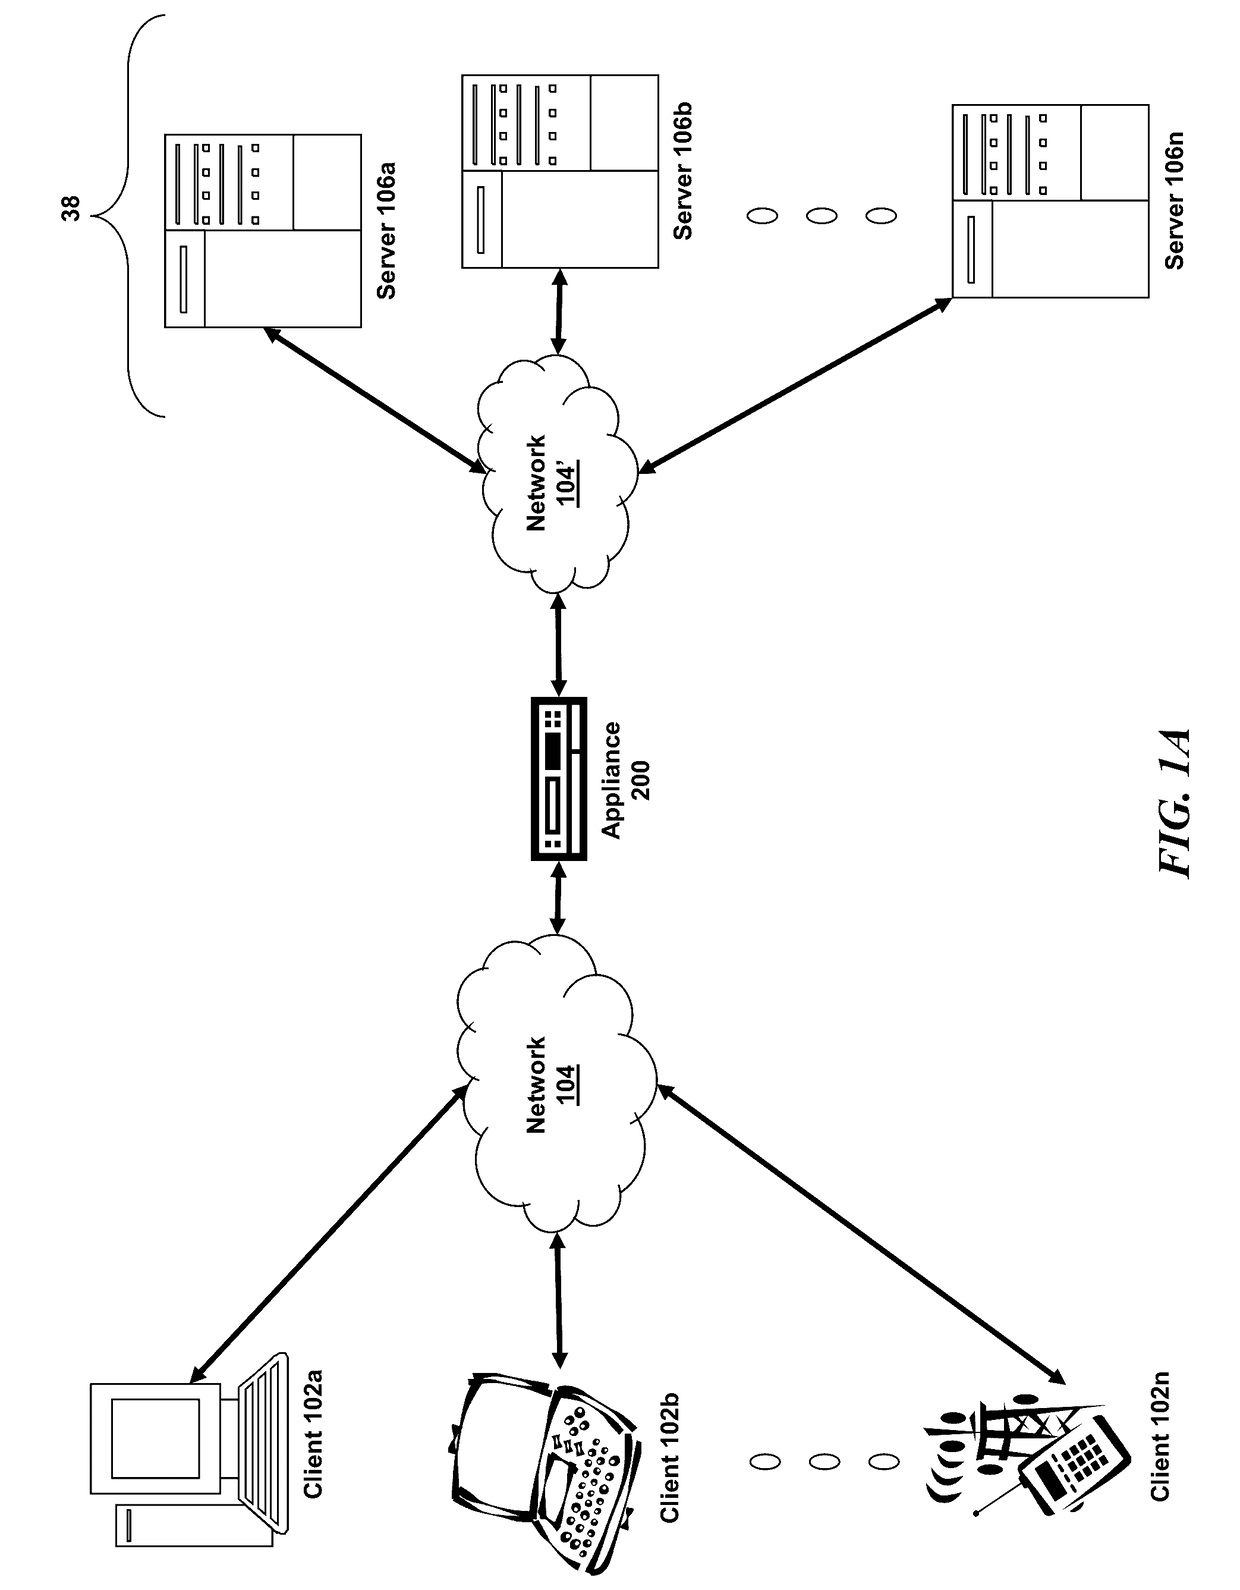 Systems and methods for policy driven fine grain validation of servers' ssl certificate for clientless sslvpn access